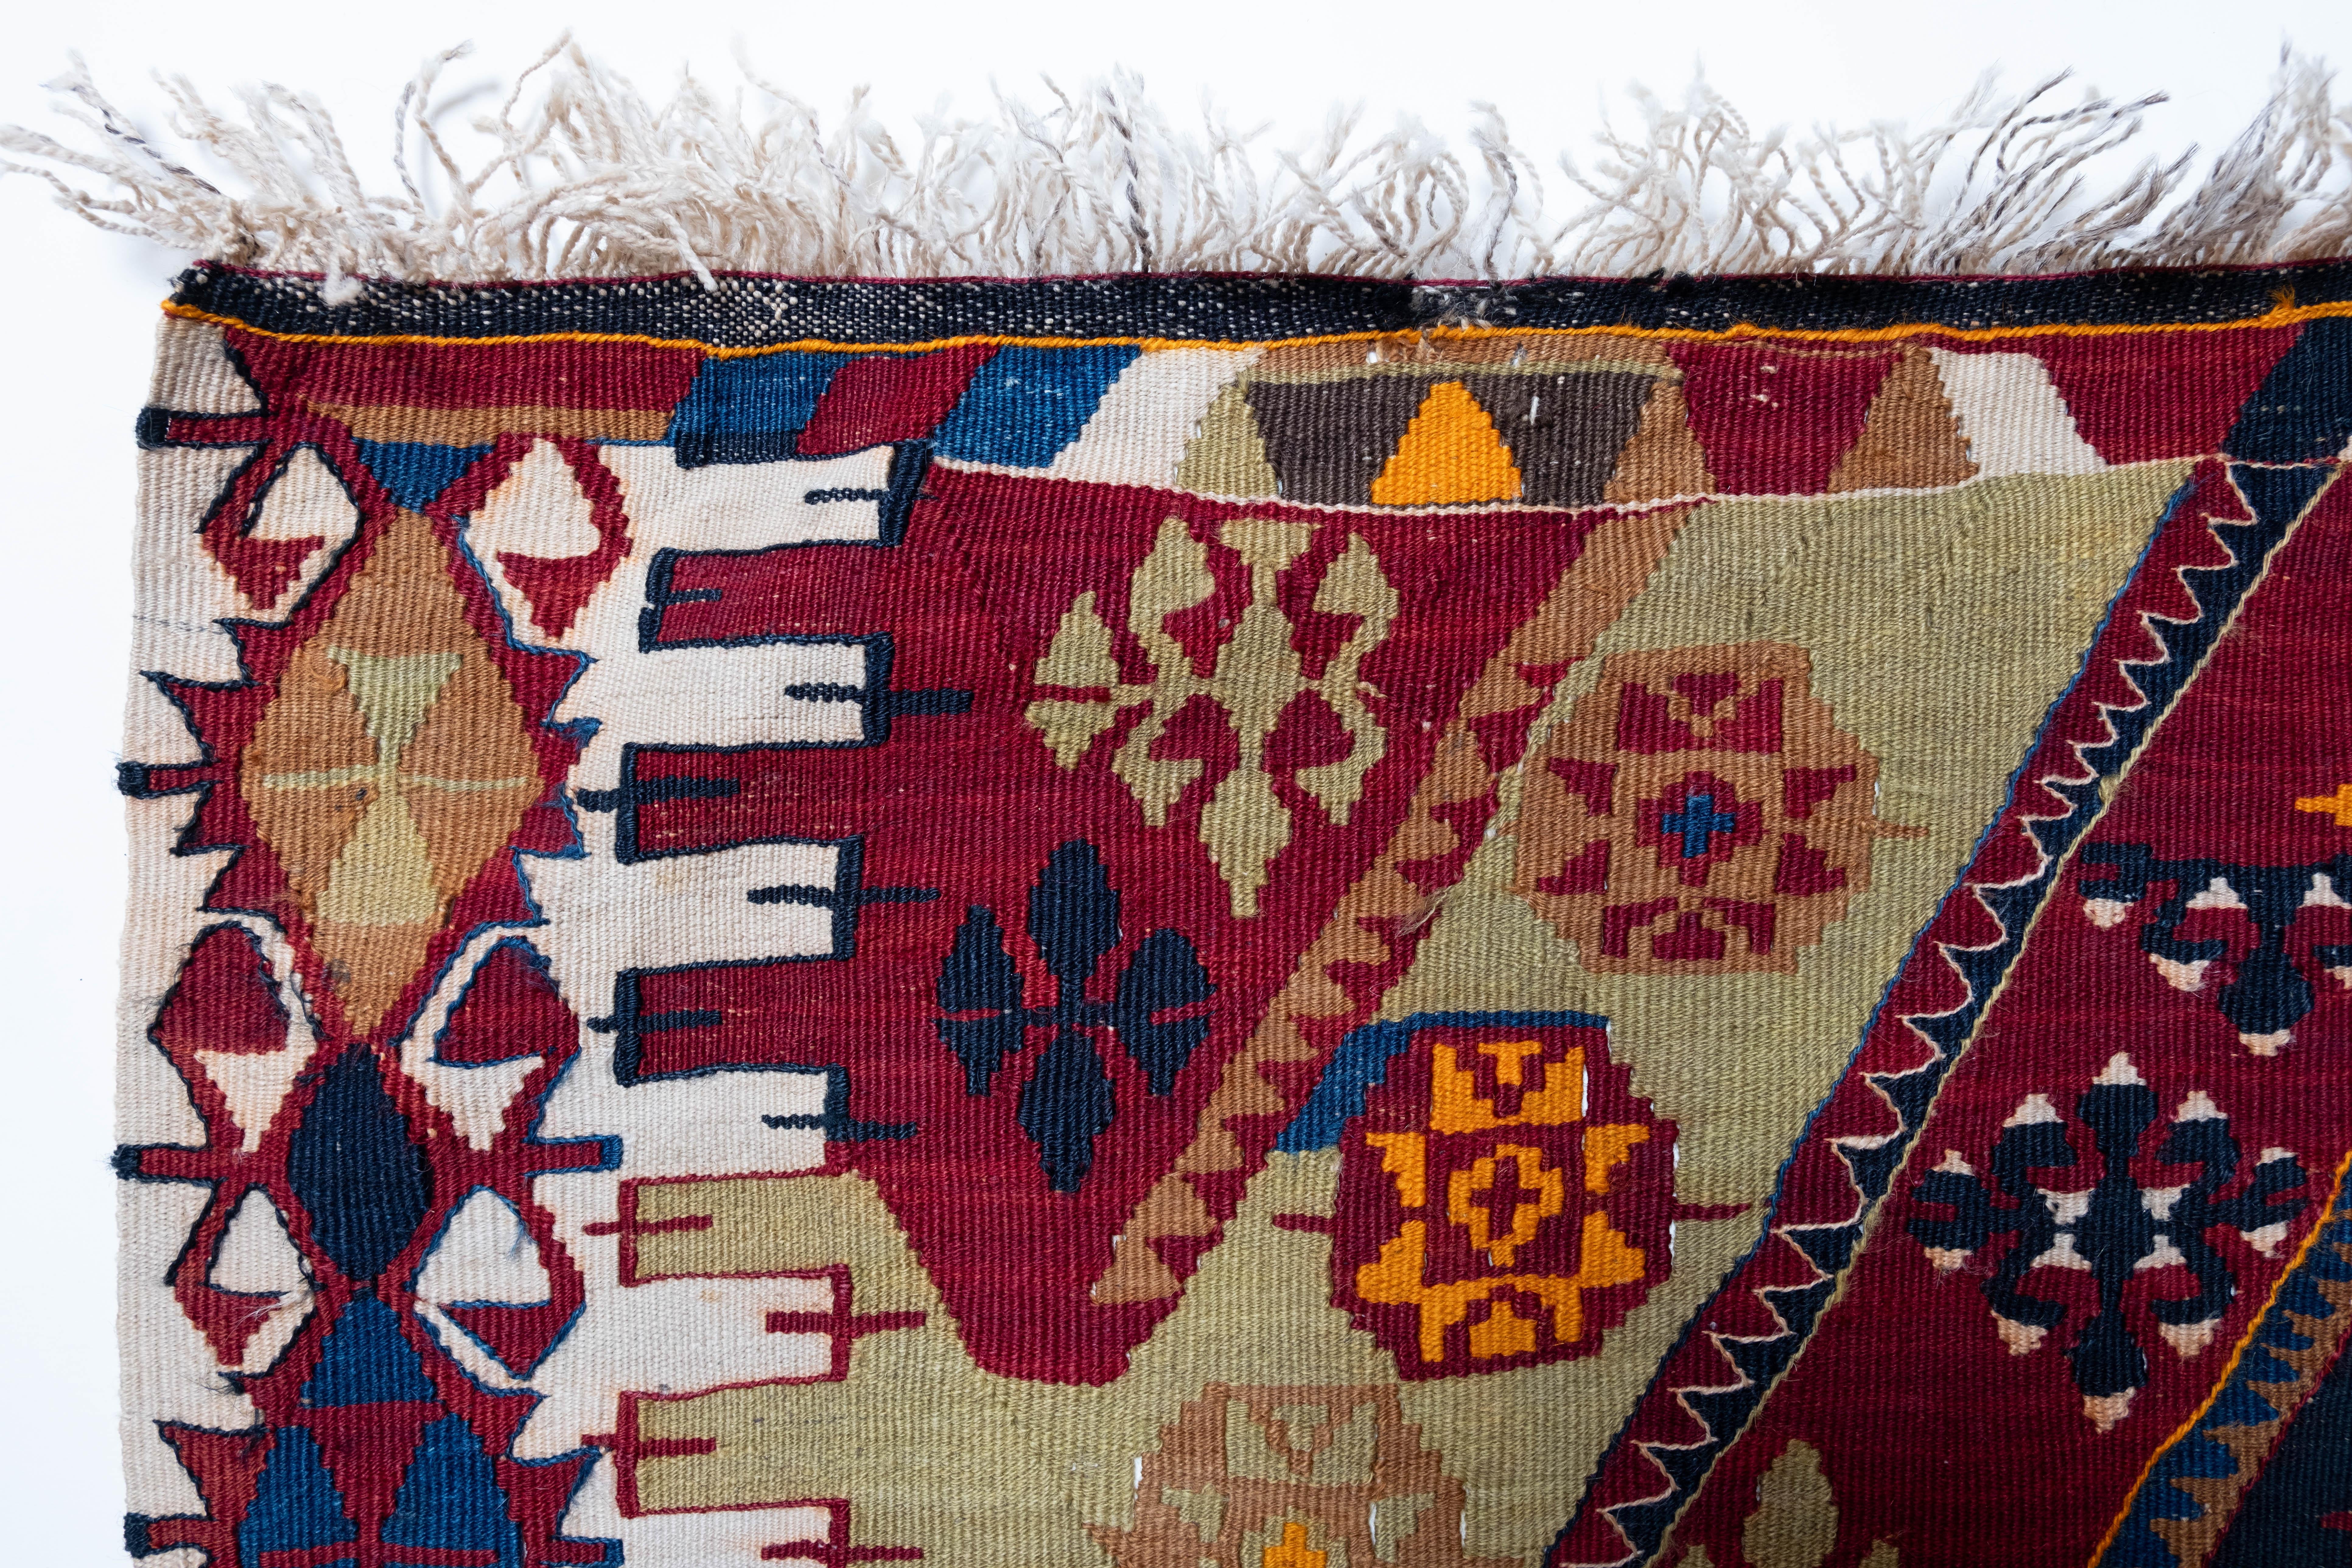 This is Eastern Anatolian Old, Vintage Kilim from the Malatya region with a rare and beautiful color composition.

This highly collectible antique kilim has wonderful special colors and textures that are typical of an old kilim in good condition. It